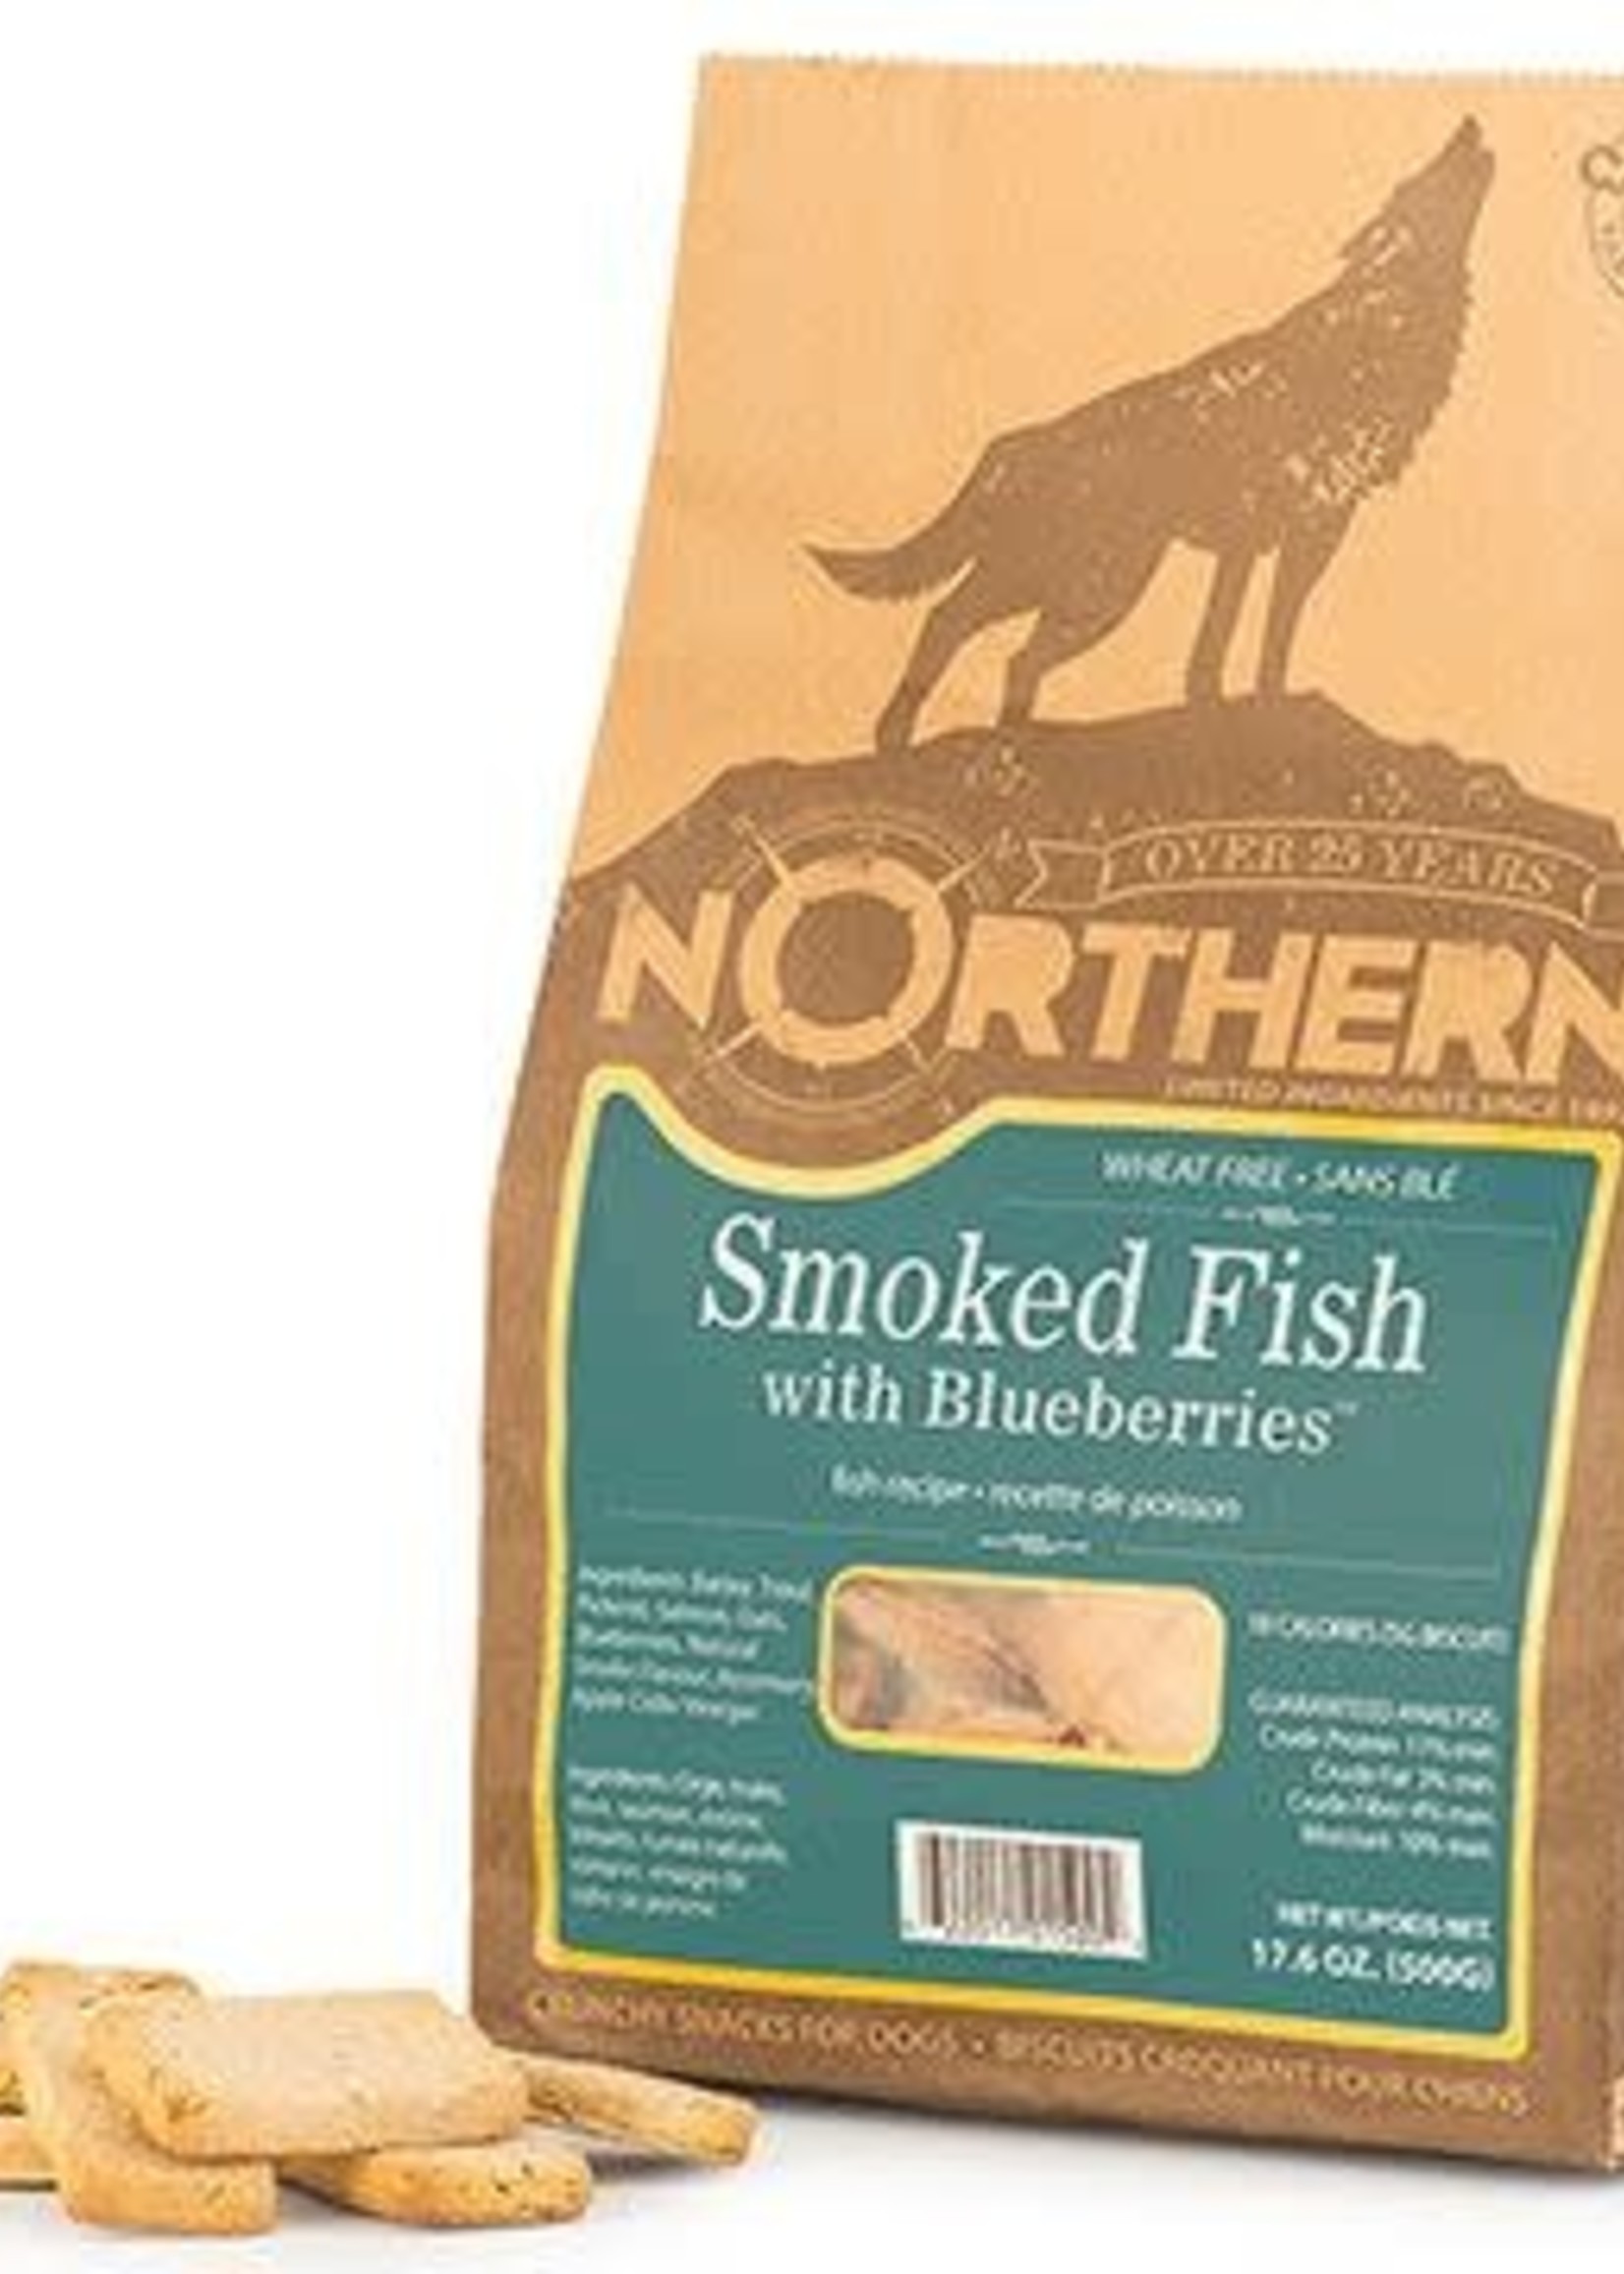 Northern Northern Biscuit Smoked Fish with Blueberries 500g Single